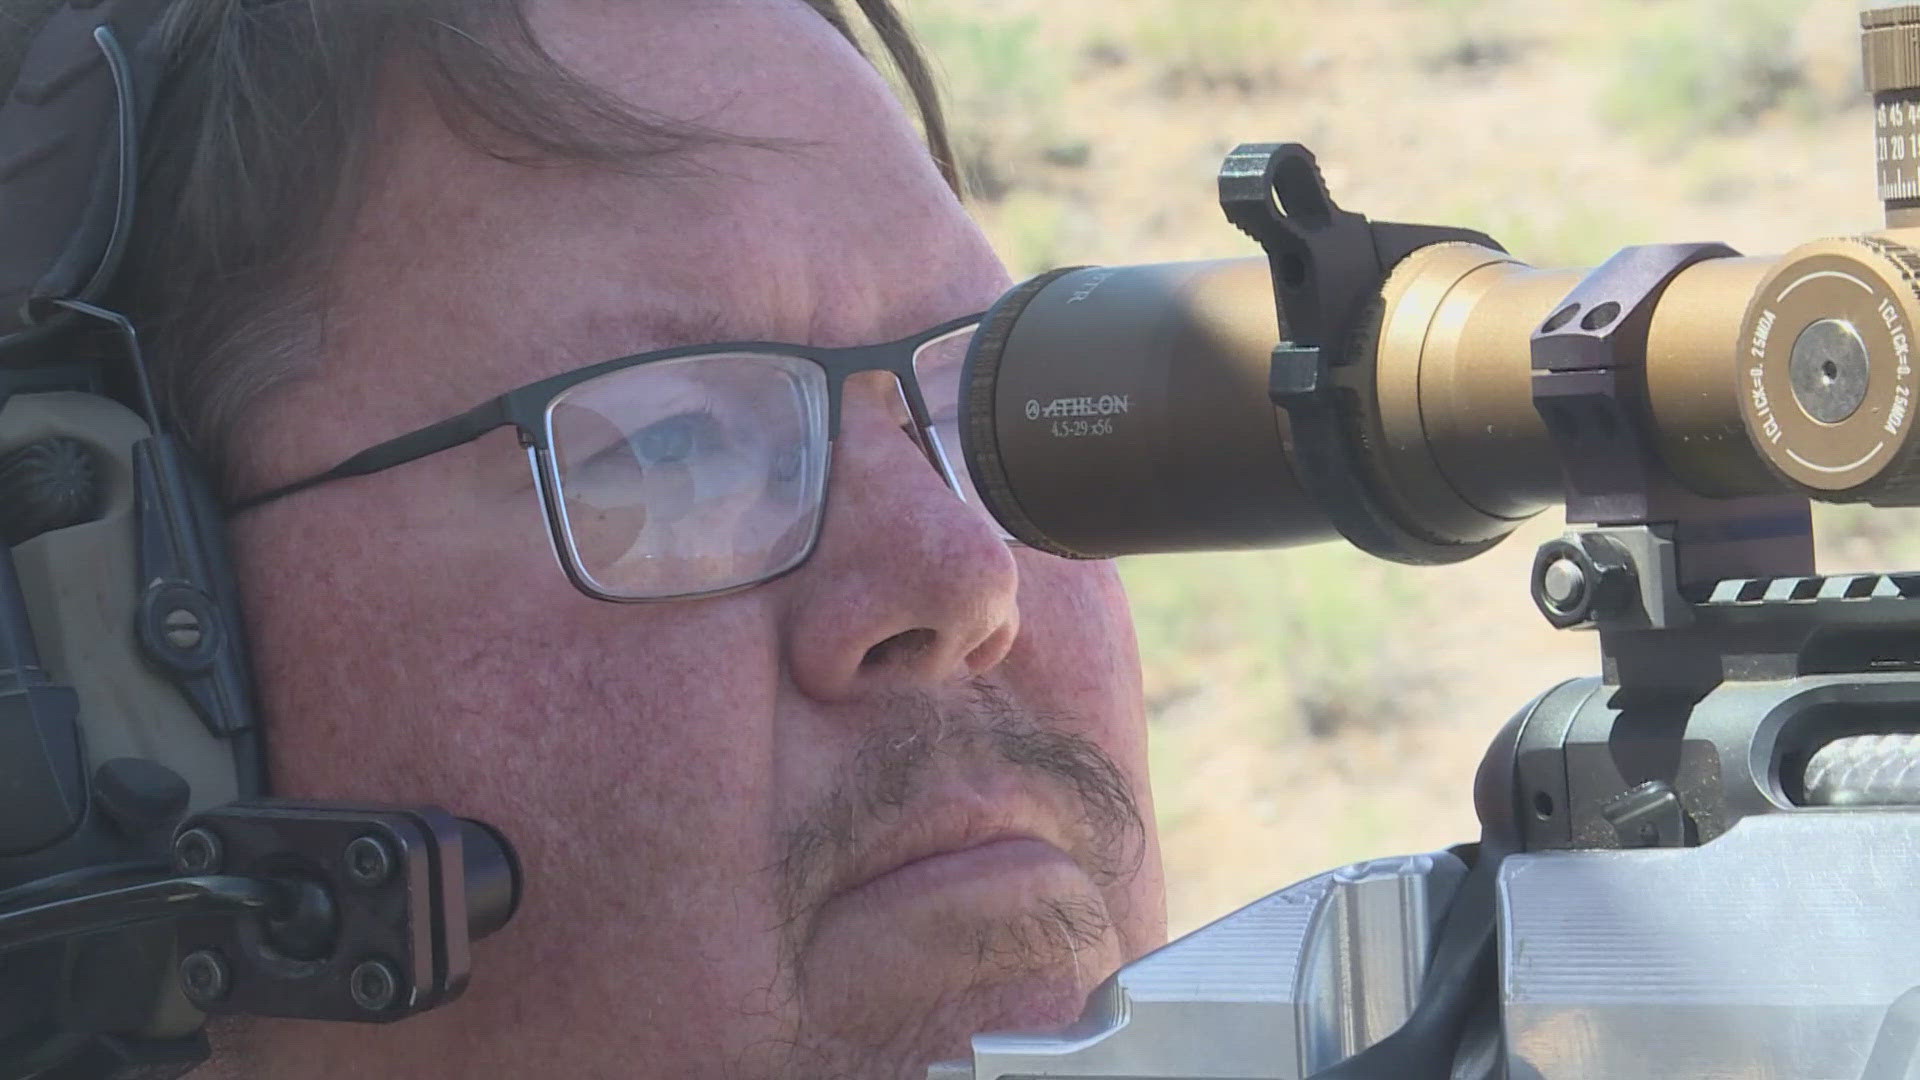 Ryan Kinnear retrofitted his wheelchair to hold and fire his rifle.